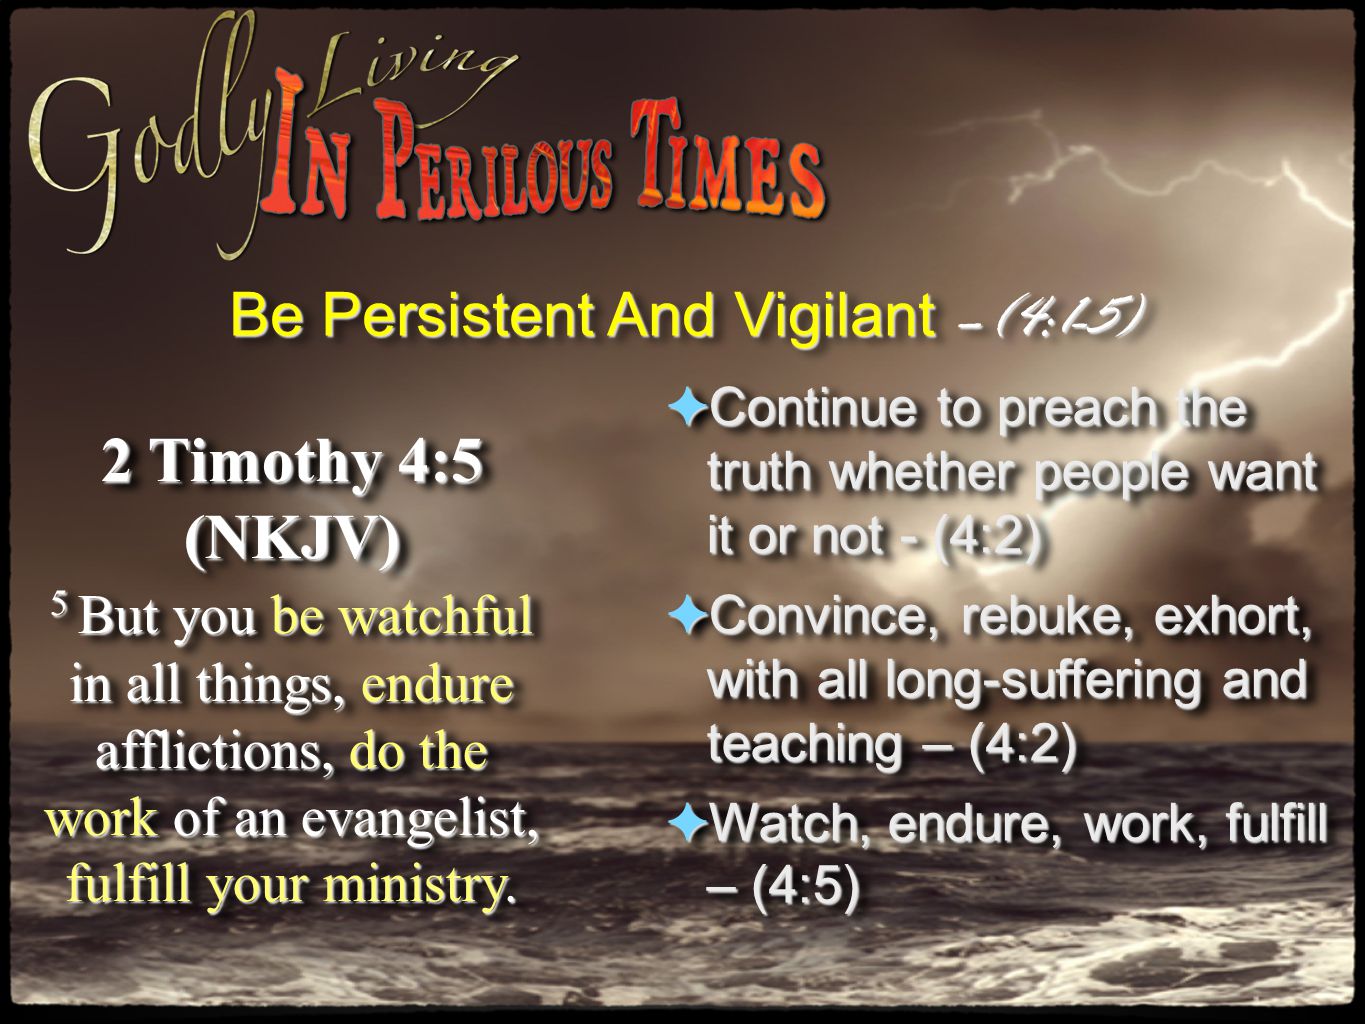 Be Persistent And Vigilant –(4:1-5) 2 Timothy 4:5 (NKJV) 5 But you be watchful in all things, endure afflictions, do the work of an evangelist, fulfill your ministry.